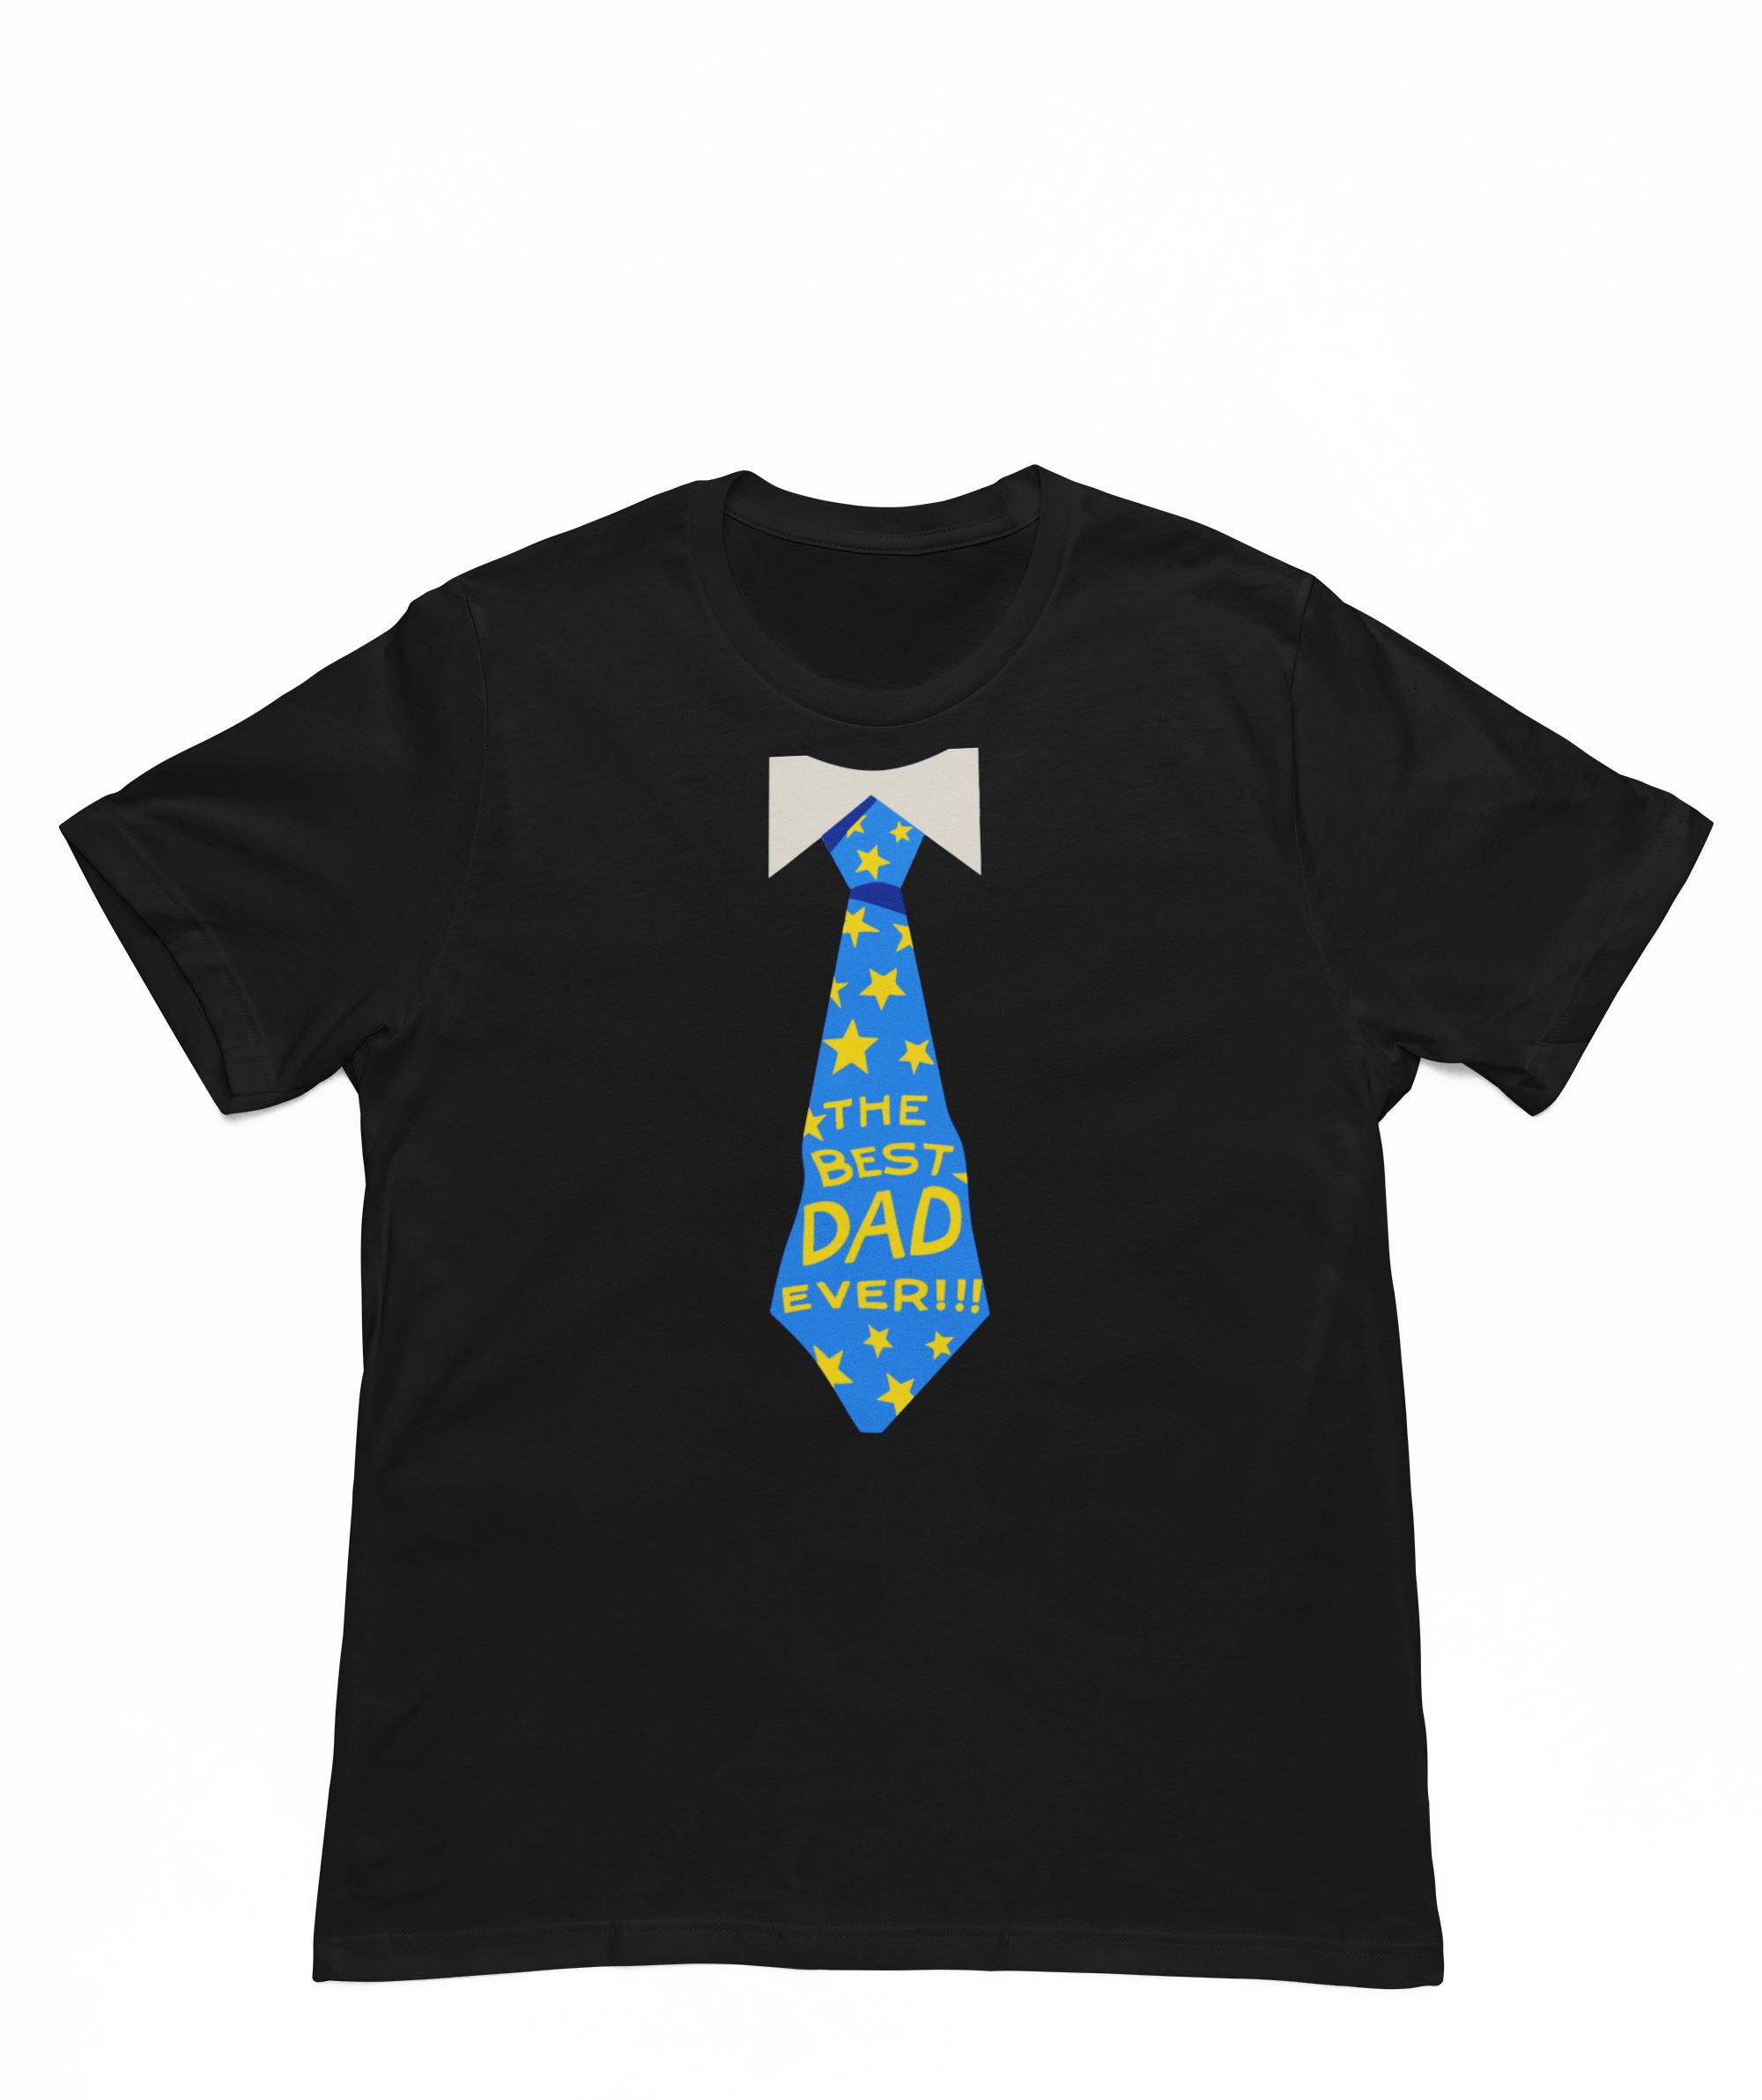 Tie Dad t-shirt - Father's Day gift